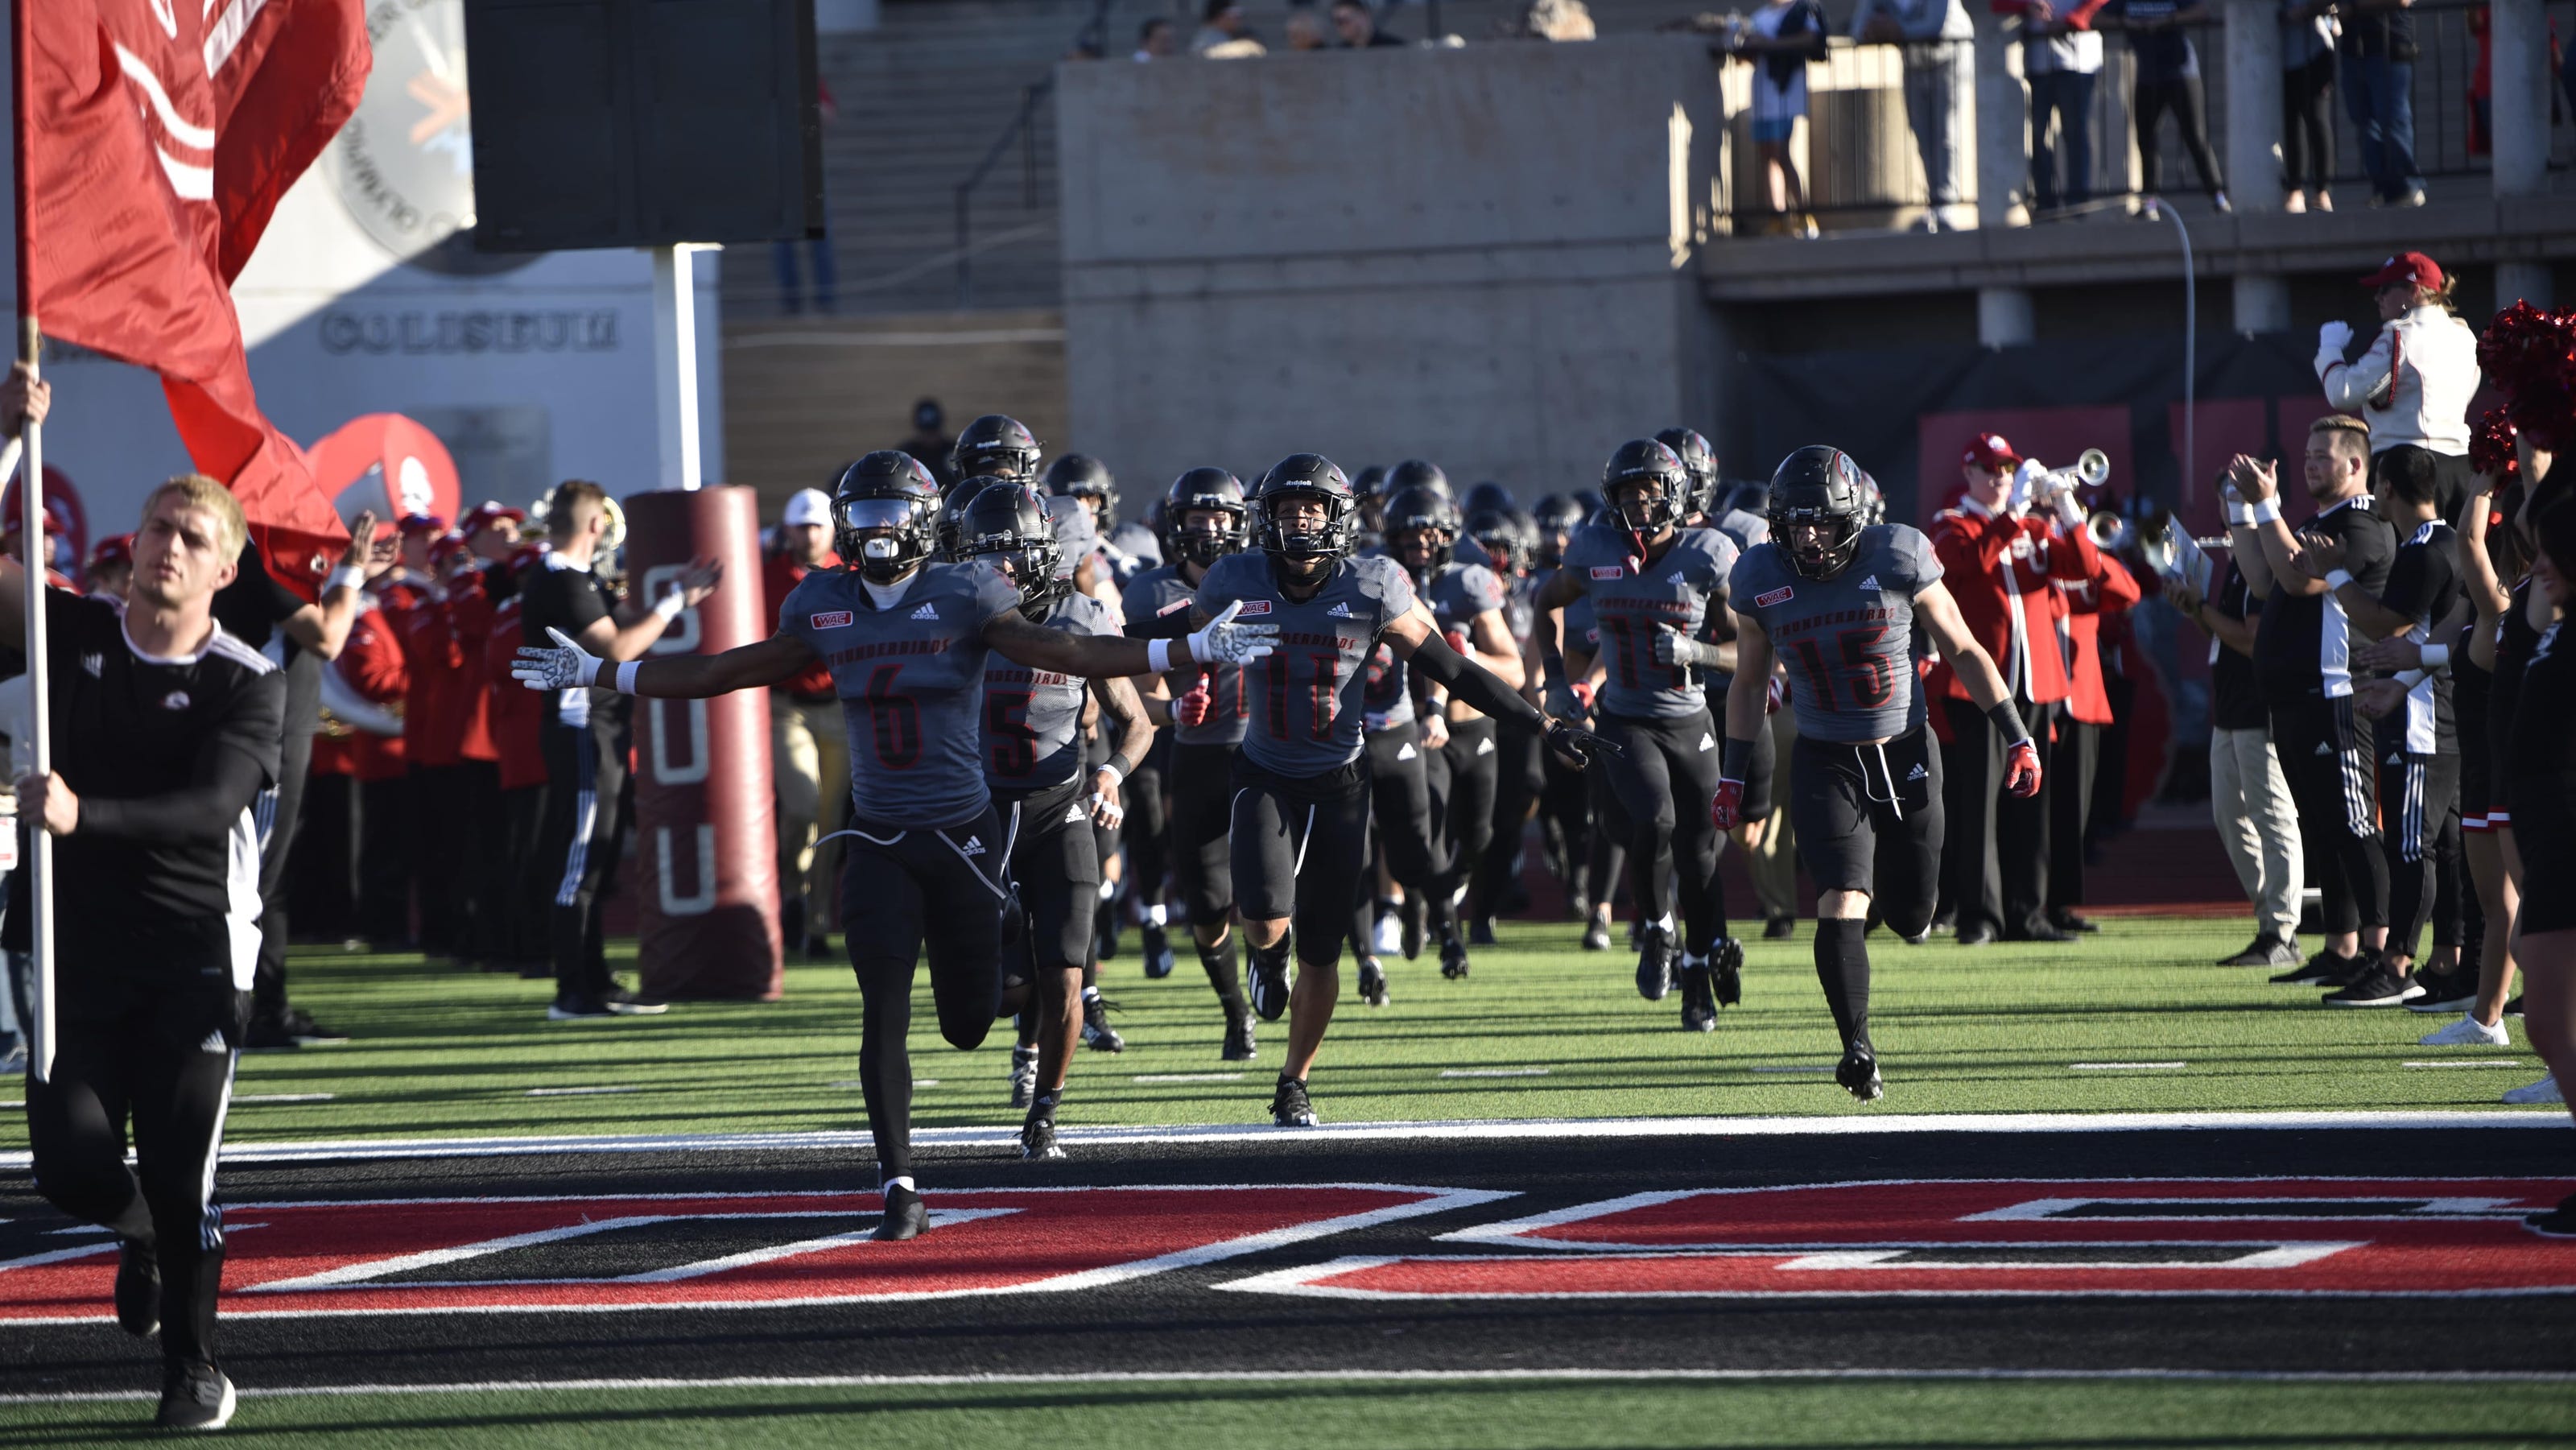 Southern Utah looks to snap three-game skid as it welcome #20 Stephen F. Austin